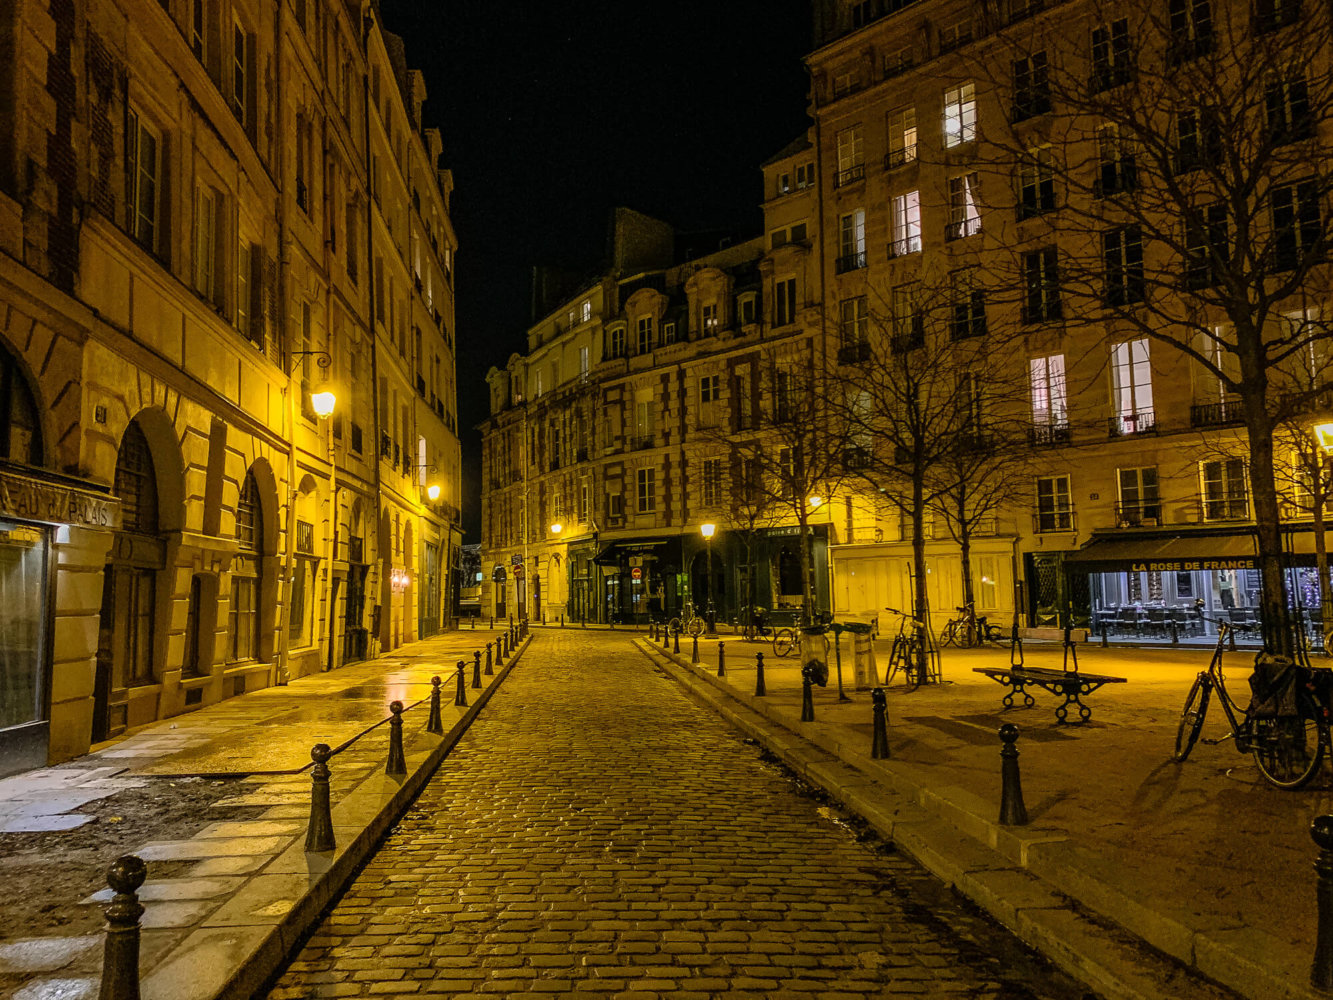 Place Dauphin at night